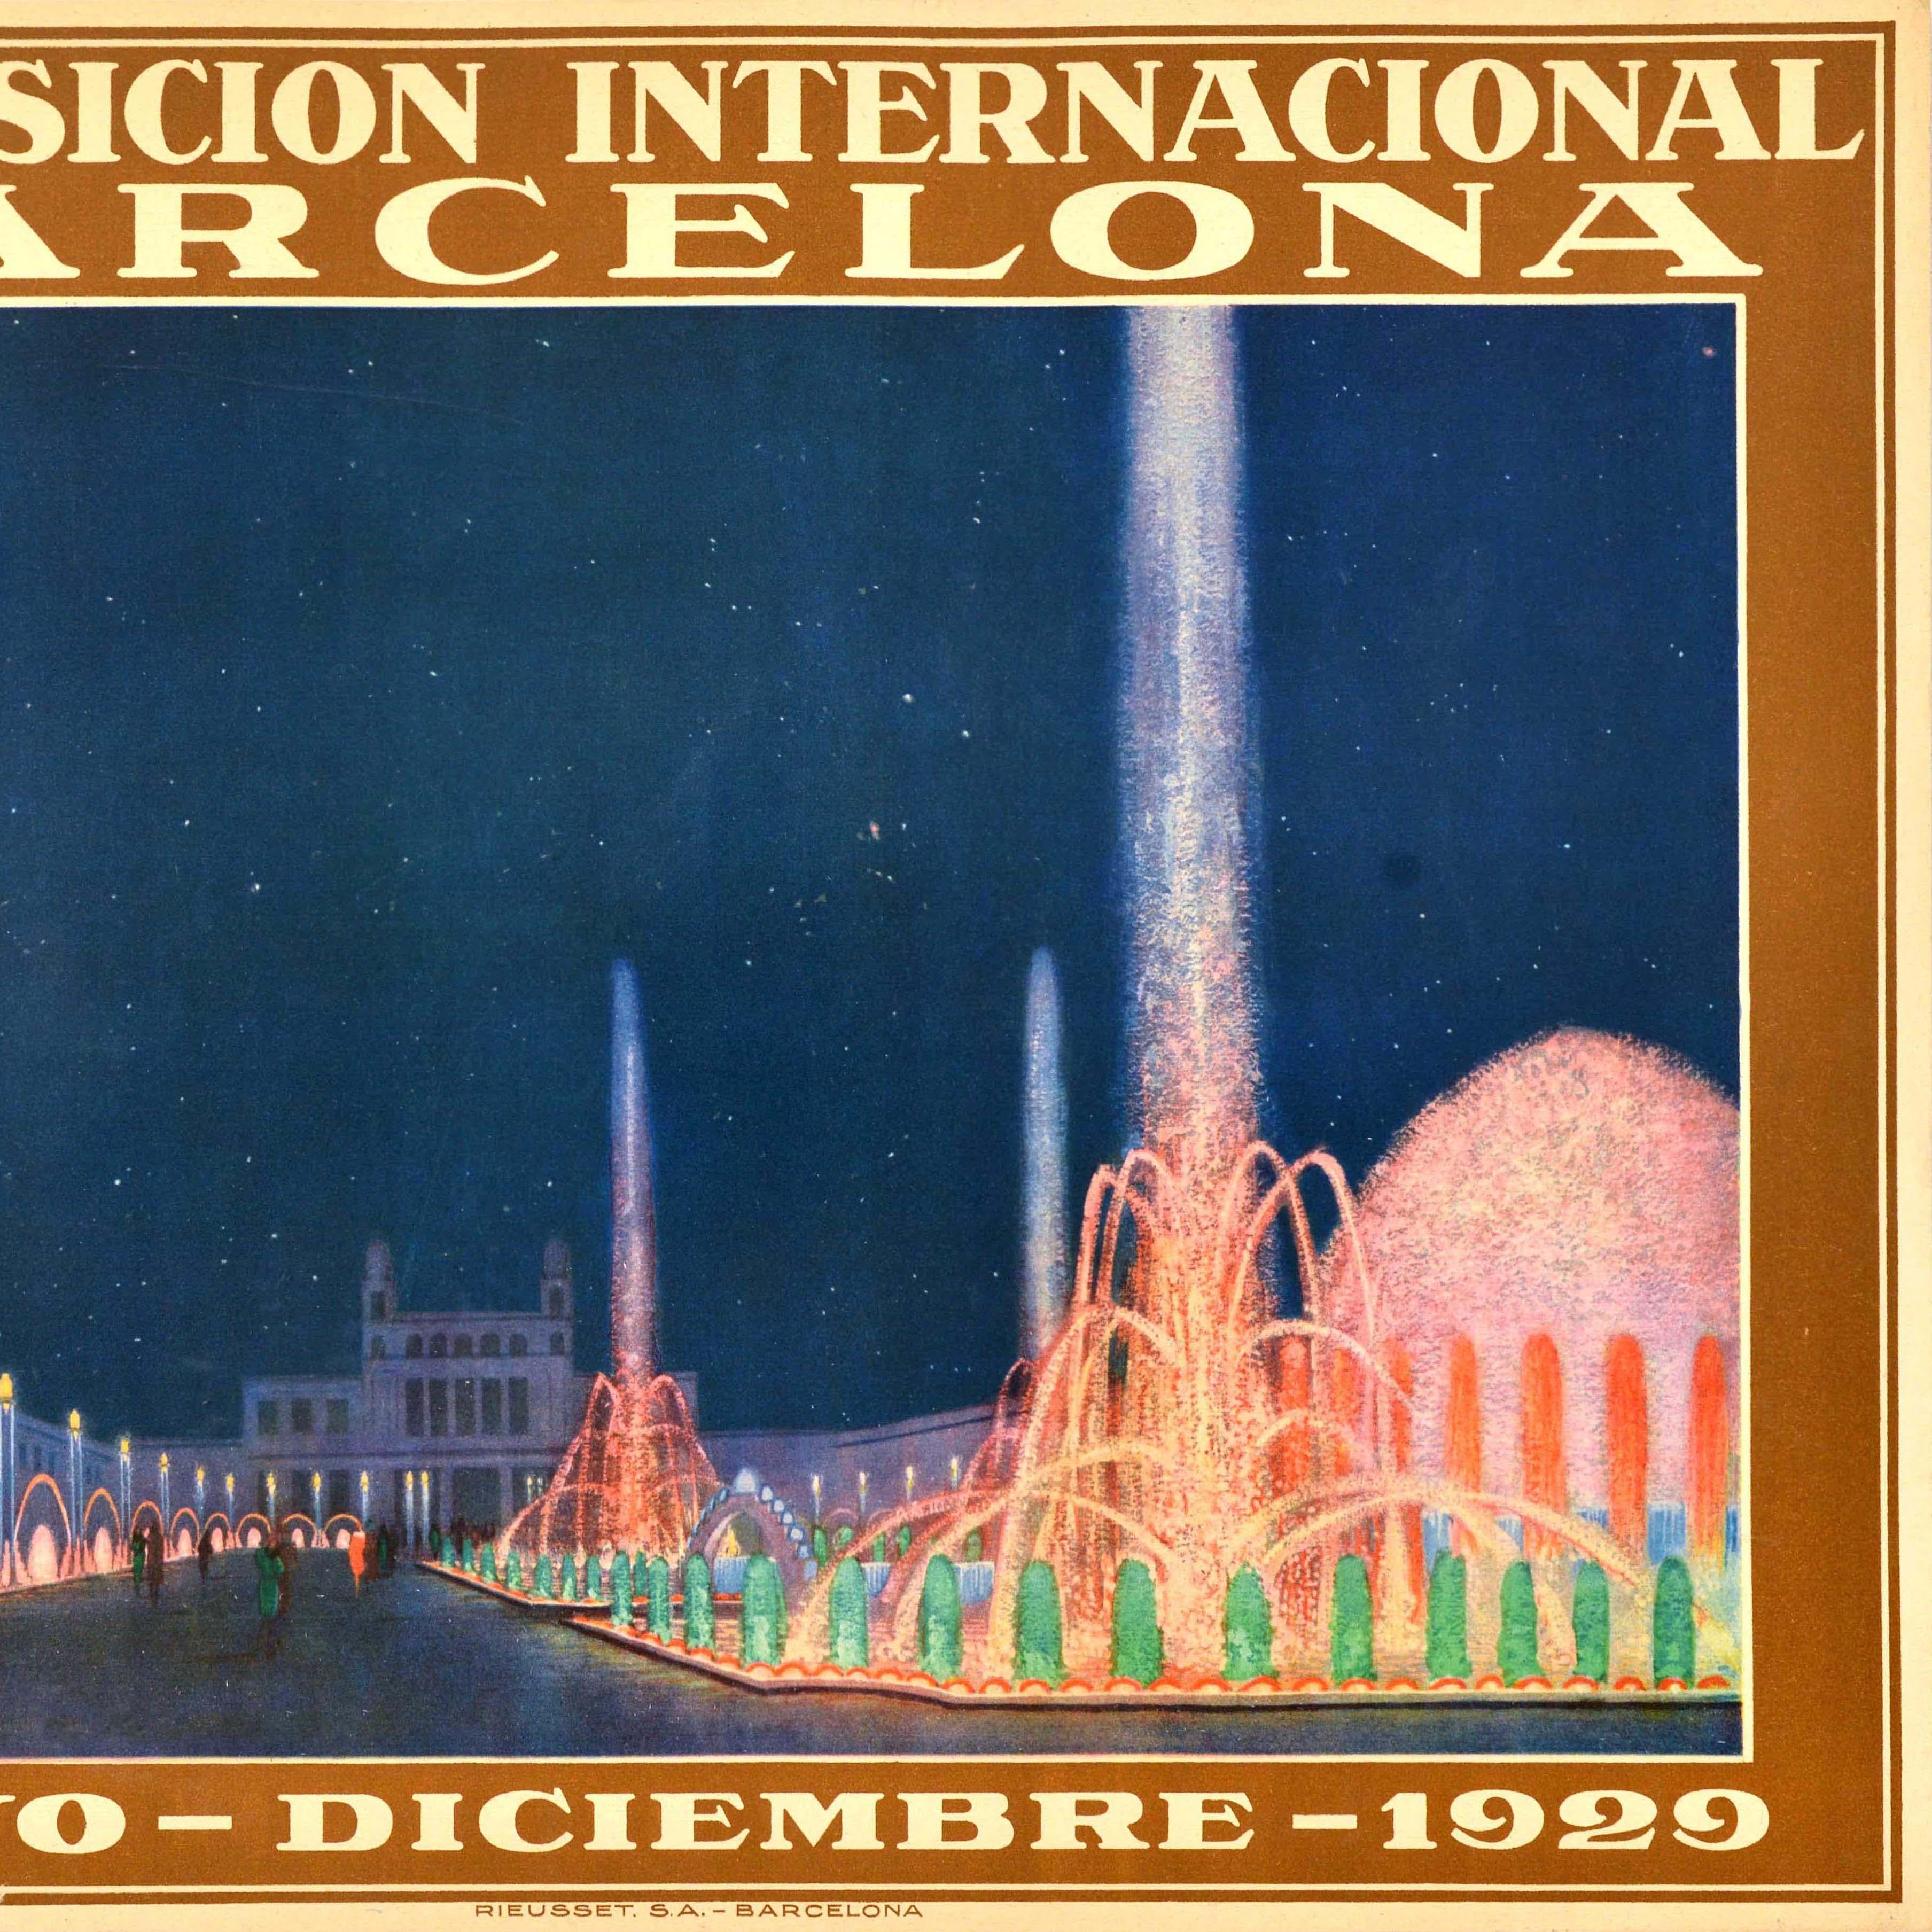 Original Vintage Advertising Poster Barcelona International Exposition 1929 Fair In Good Condition For Sale In London, GB